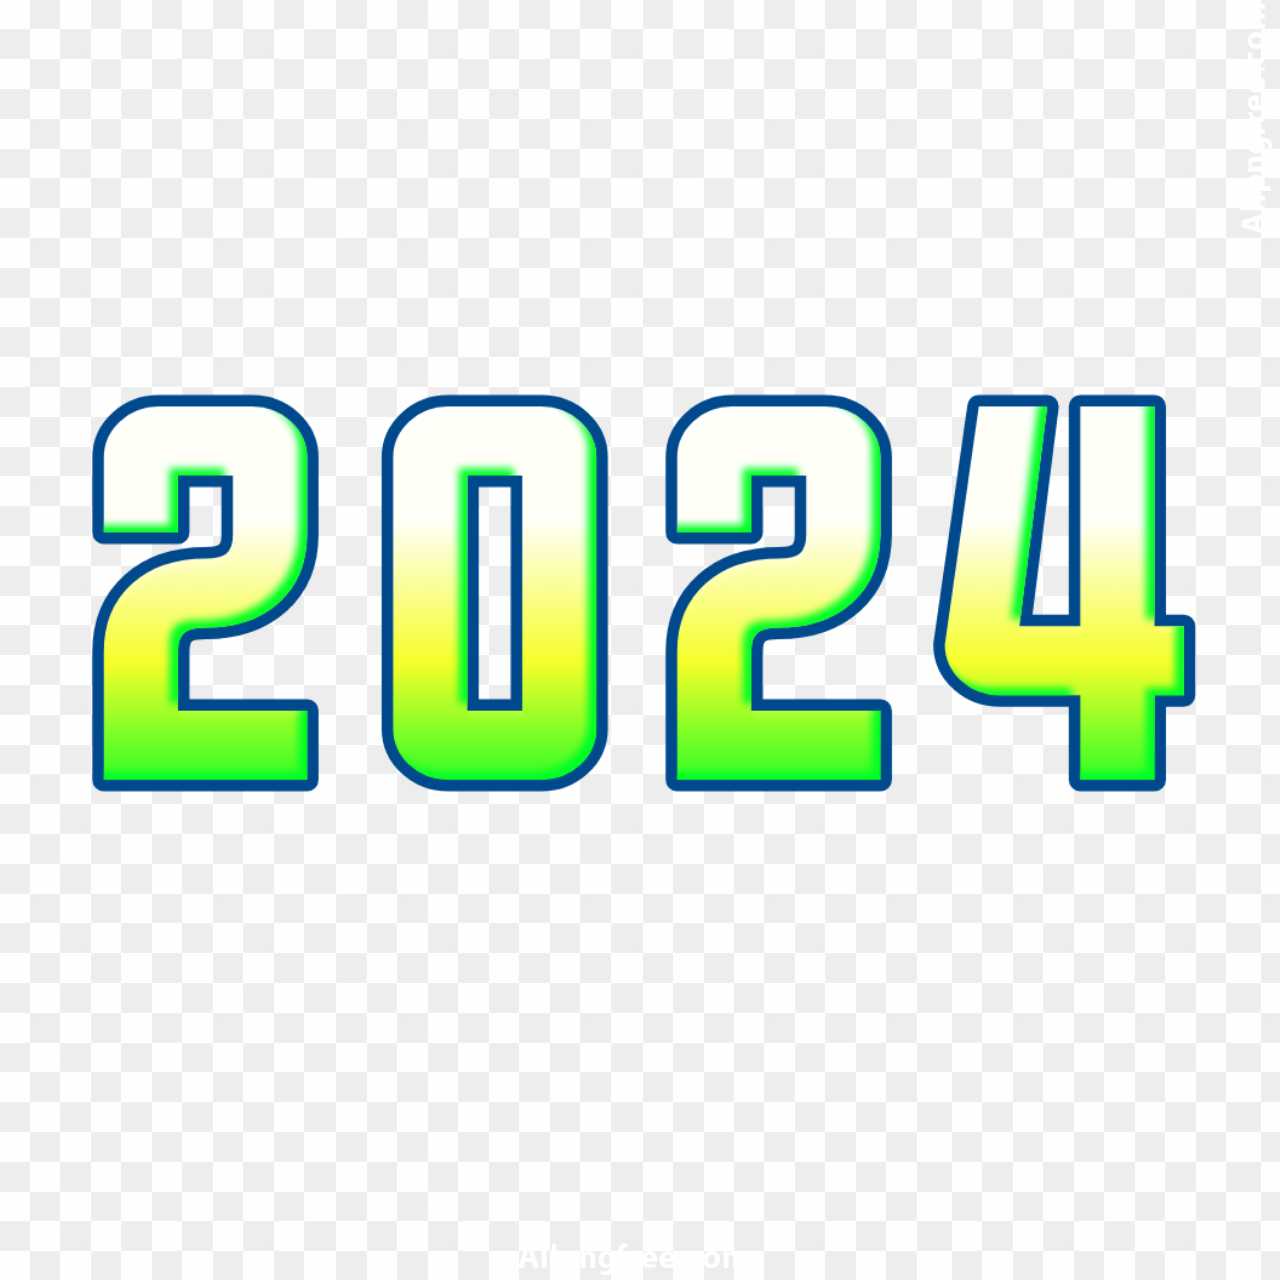 2024 number text PNG images download